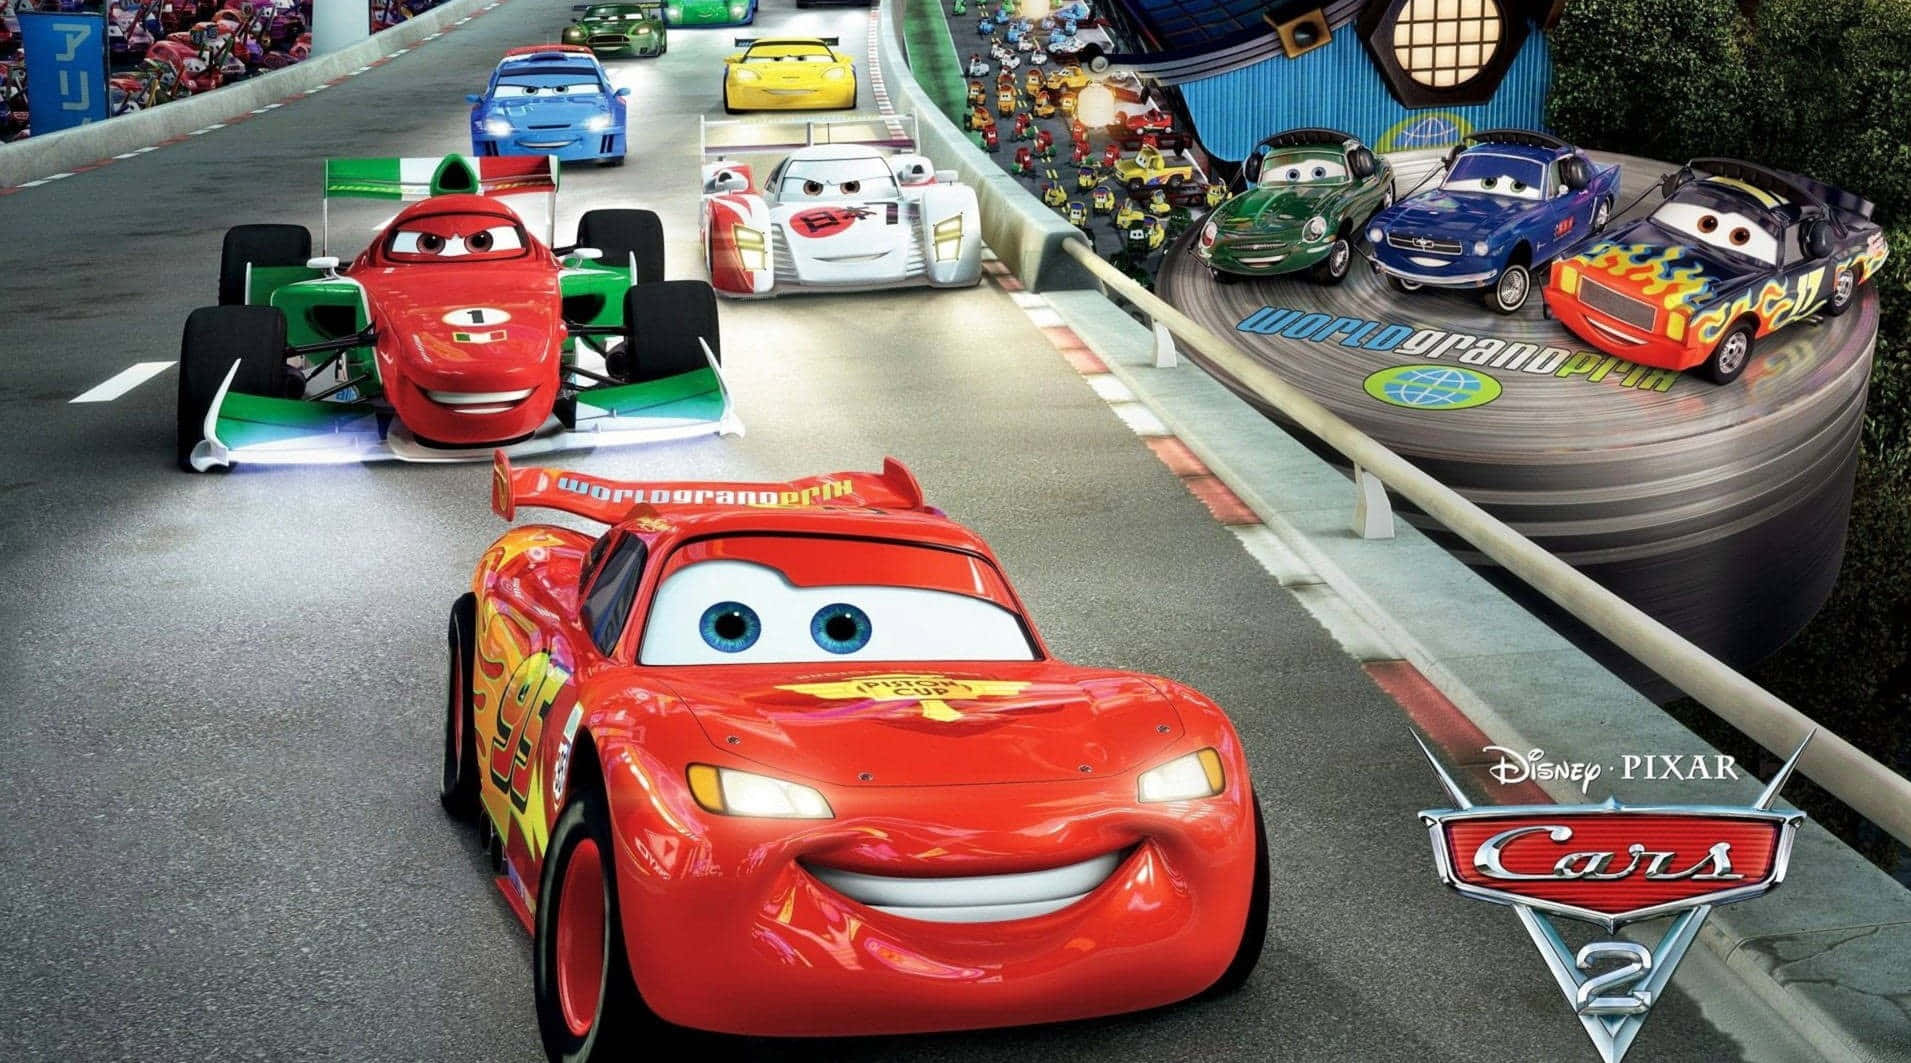 Lightning McQueen zooming on the race track